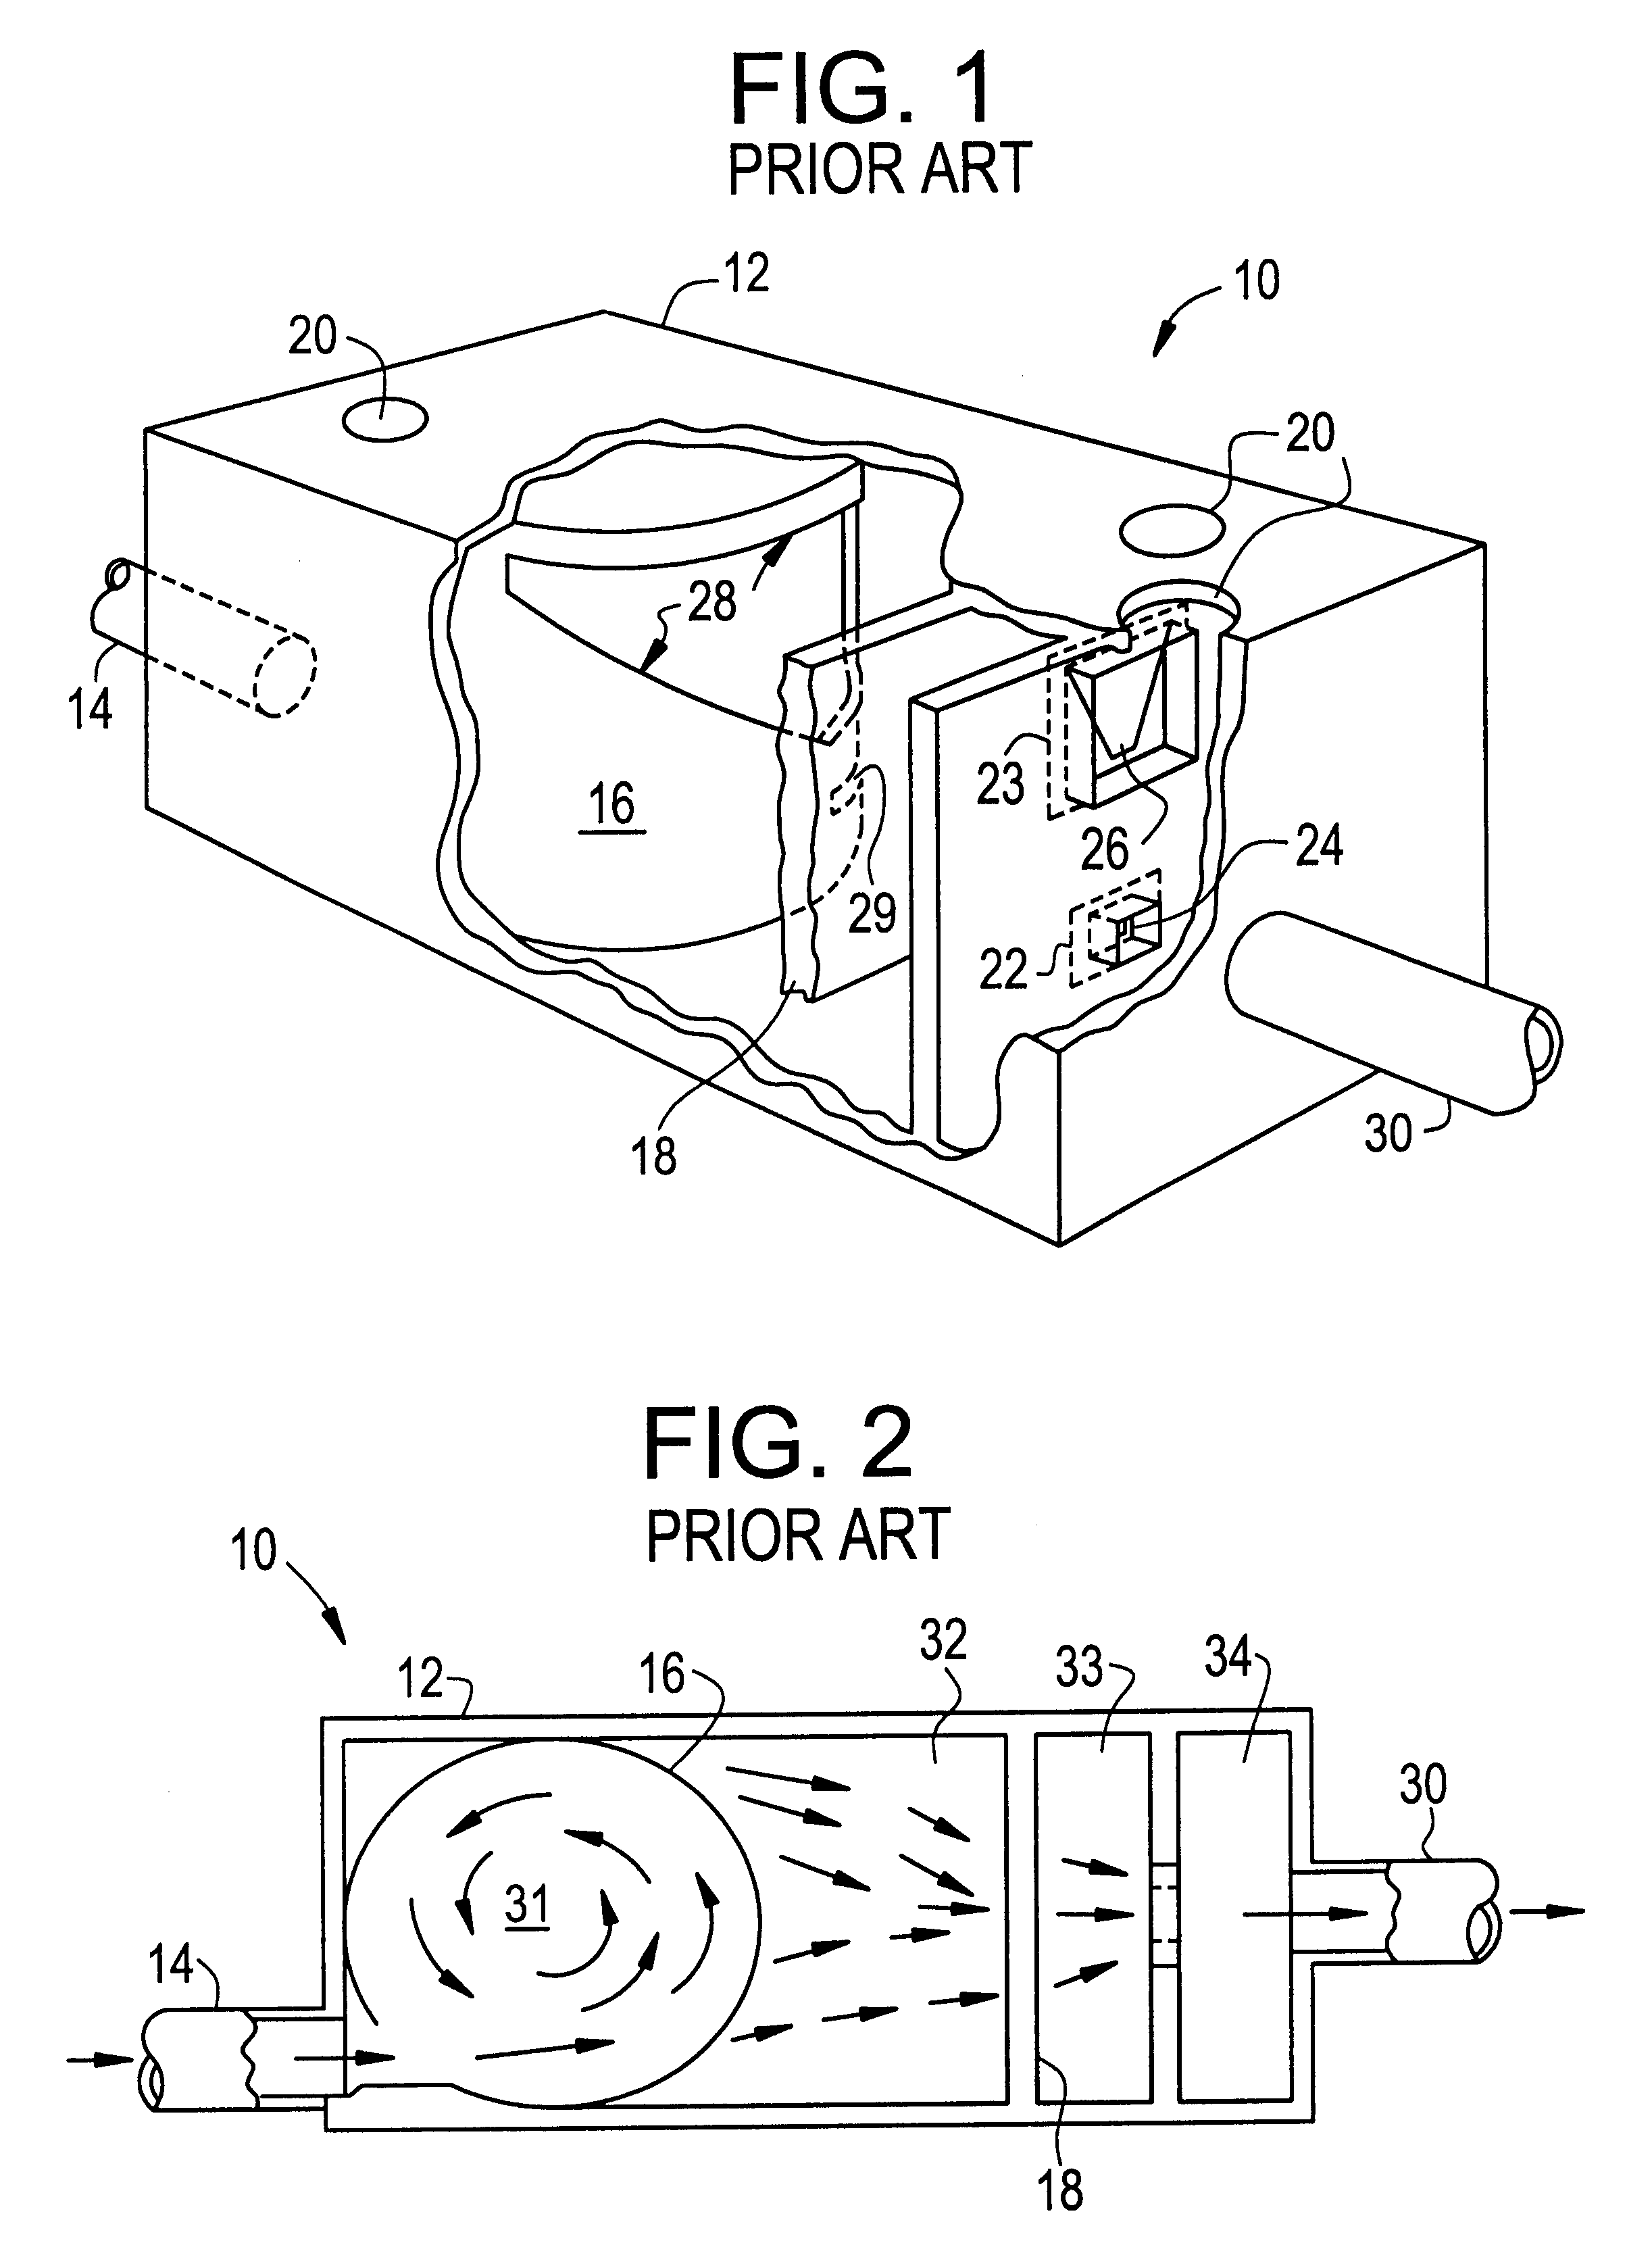 Apparatus for removing noxious contaminants from drainage water